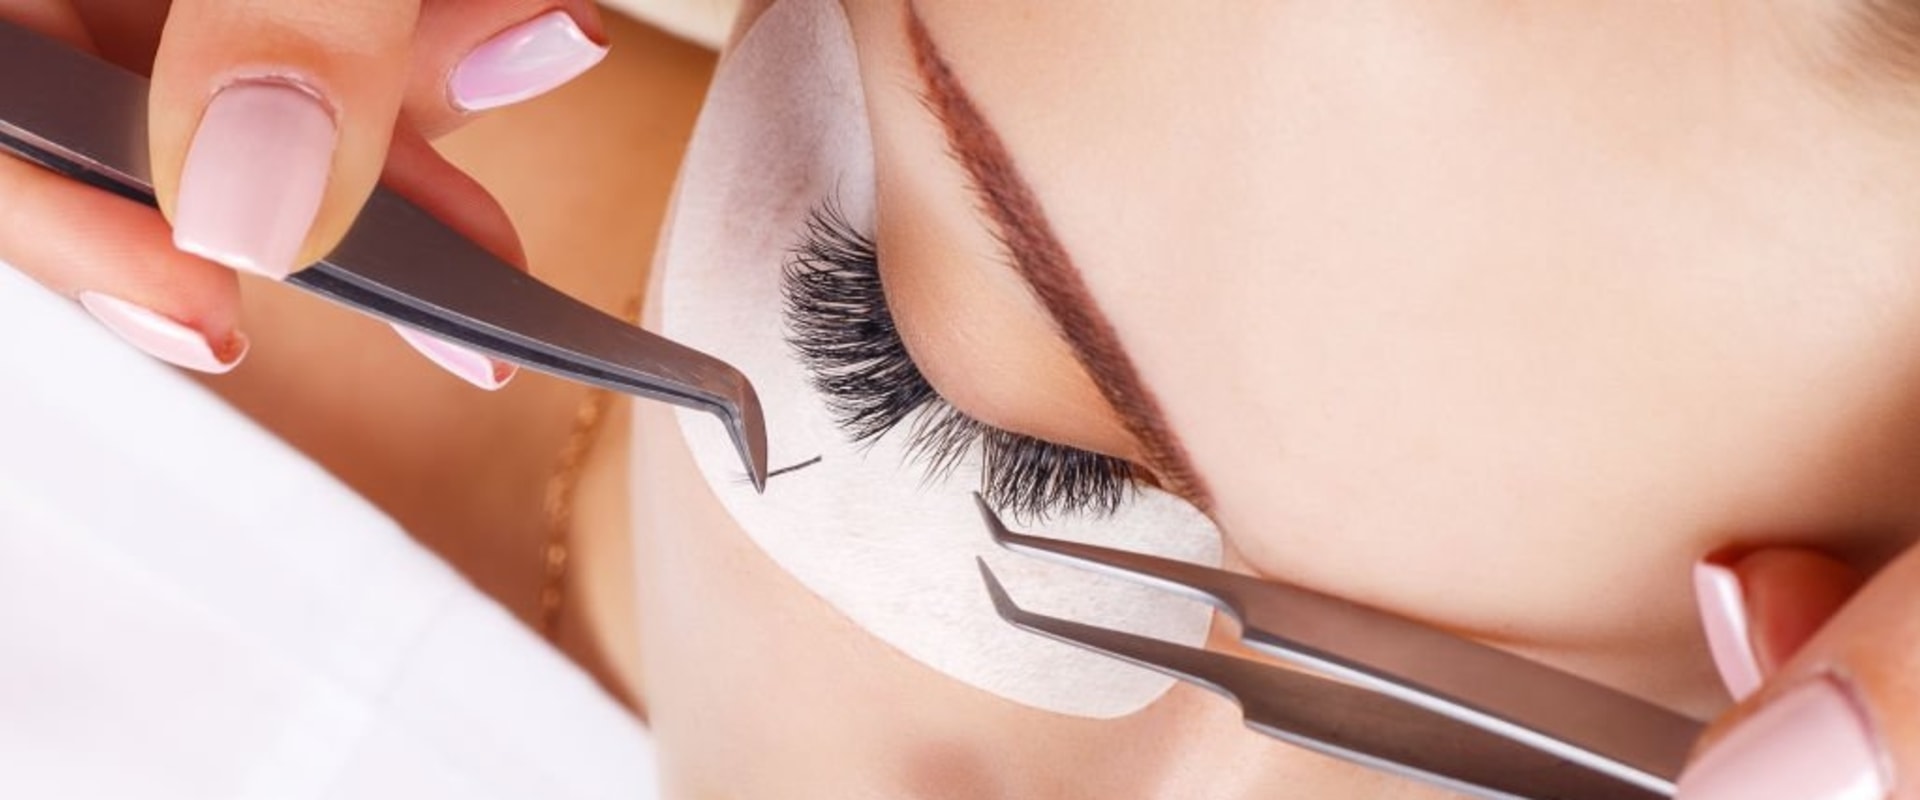 Do eyelash extensions really make a difference?